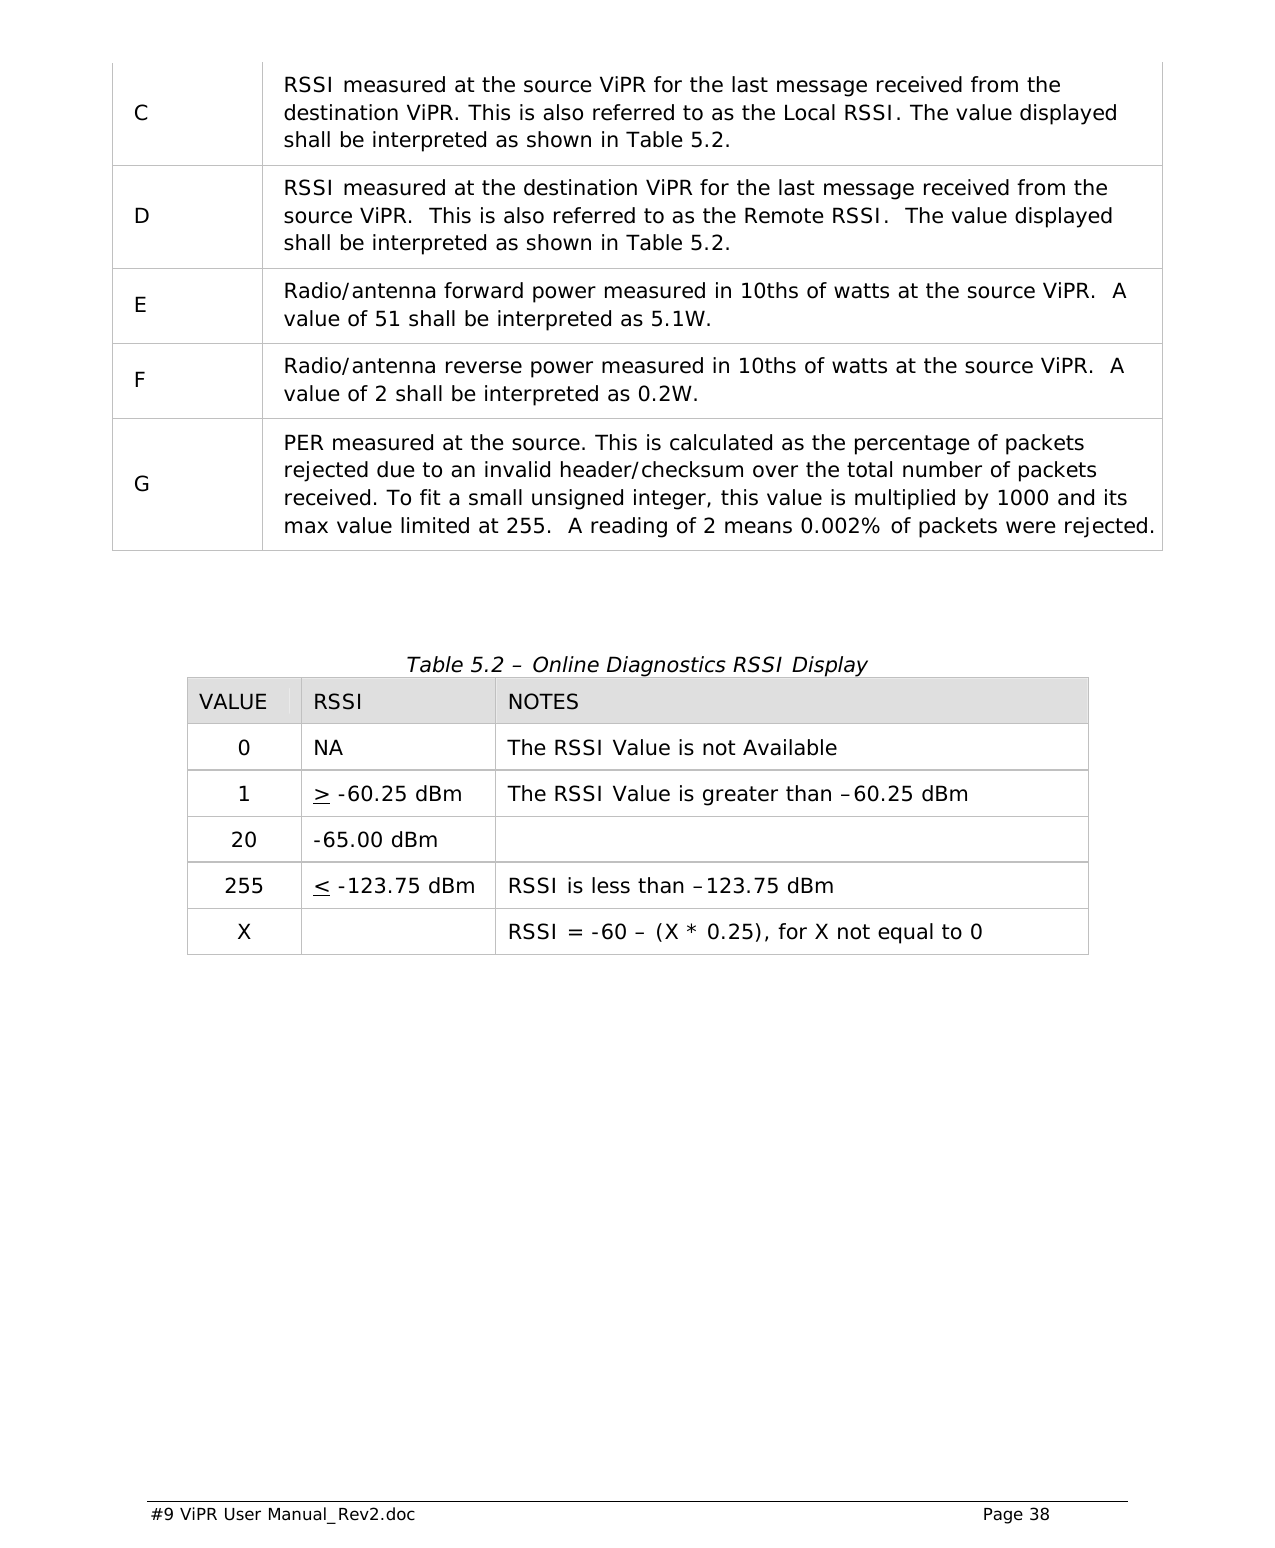  #9 ViPR User Manual_Rev2.doc    Page 38  C  RSSI measured at the source ViPR for the last message received from the destination ViPR. This is also referred to as the Local RSSI. The value displayed shall be interpreted as shown in Table 5.2. D  RSSI measured at the destination ViPR for the last message received from the source ViPR.  This is also referred to as the Remote RSSI.  The value displayed shall be interpreted as shown in Table 5.2.  E  Radio/antenna forward power measured in 10ths of watts at the source ViPR.  A value of 51 shall be interpreted as 5.1W. F  Radio/antenna reverse power measured in 10ths of watts at the source ViPR.  A value of 2 shall be interpreted as 0.2W. G PER measured at the source. This is calculated as the percentage of packets rejected due to an invalid header/checksum over the total number of packets received. To fit a small unsigned integer, this value is multiplied by 1000 and its max value limited at 255.  A reading of 2 means 0.002% of packets were rejected.   Table 5.2 – Online Diagnostics RSSI Display VALUE  RSSI  NOTES 0  NA  The RSSI Value is not Available 1 &gt; -60.25 dBm  The RSSI Value is greater than –60.25 dBm 20 -65.00 dBm   255 &lt; -123.75 dBm  RSSI is less than –123.75 dBm X    RSSI = -60 – (X * 0.25), for X not equal to 0 